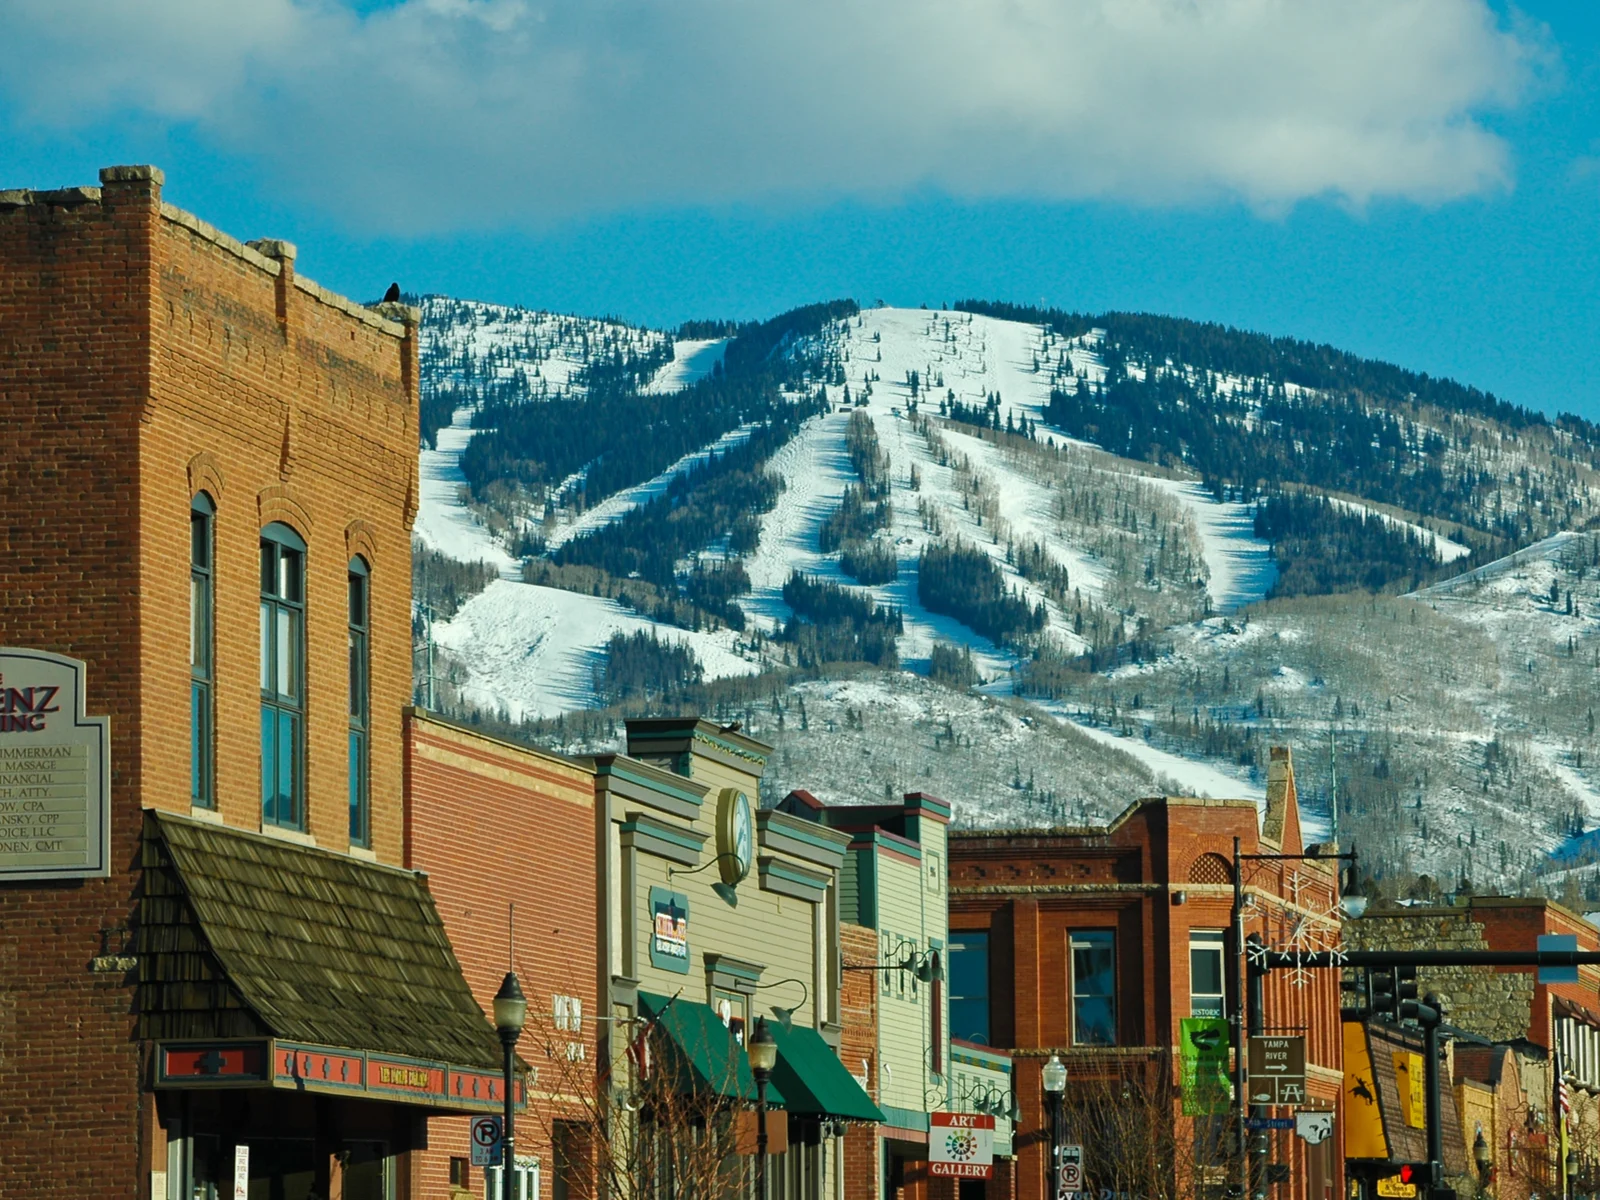  Downtown Steamboat Springs photographed with various store buildings and worm's-eye view of a skiing trial in Steamboat Ski Resort, as a piece on one of the best ski resorts near Denver